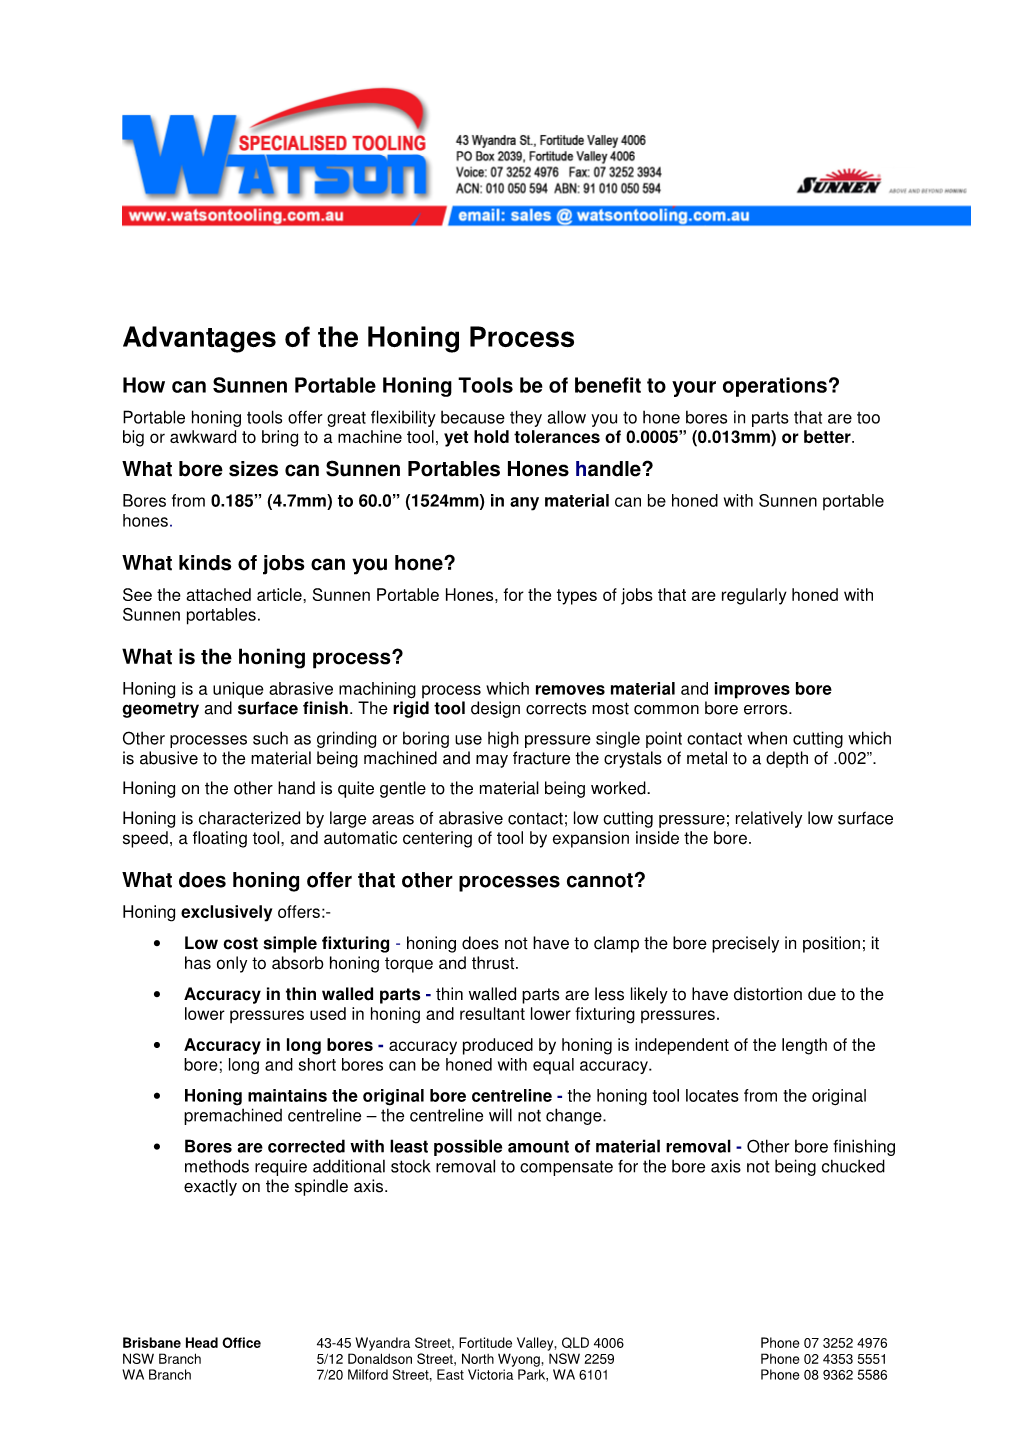 Advantages of the Honing Process